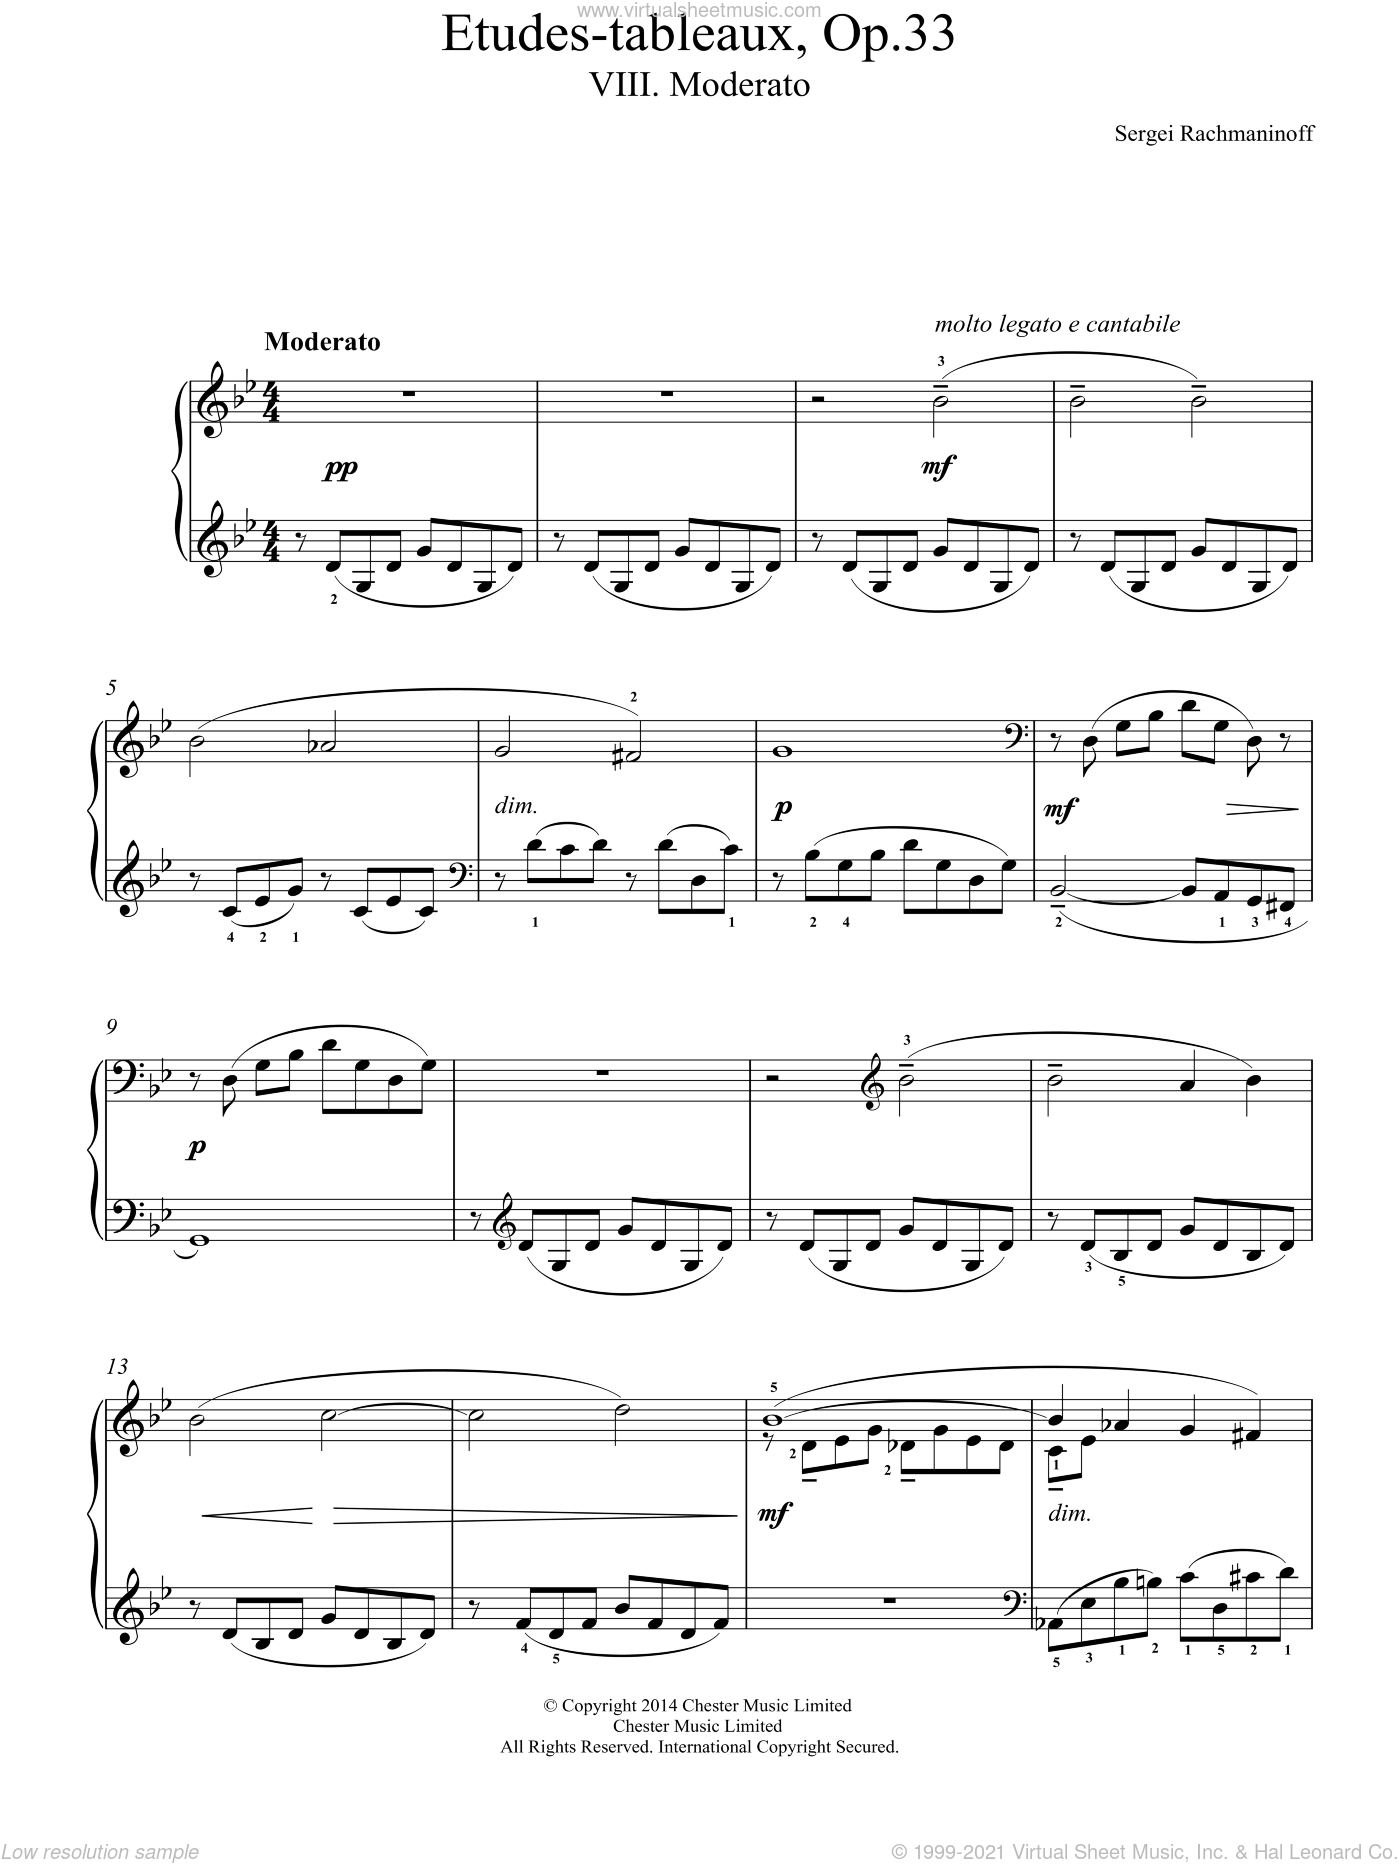 Etudes-tableaux Op.33, No.8 Moderato sheet music for piano solo